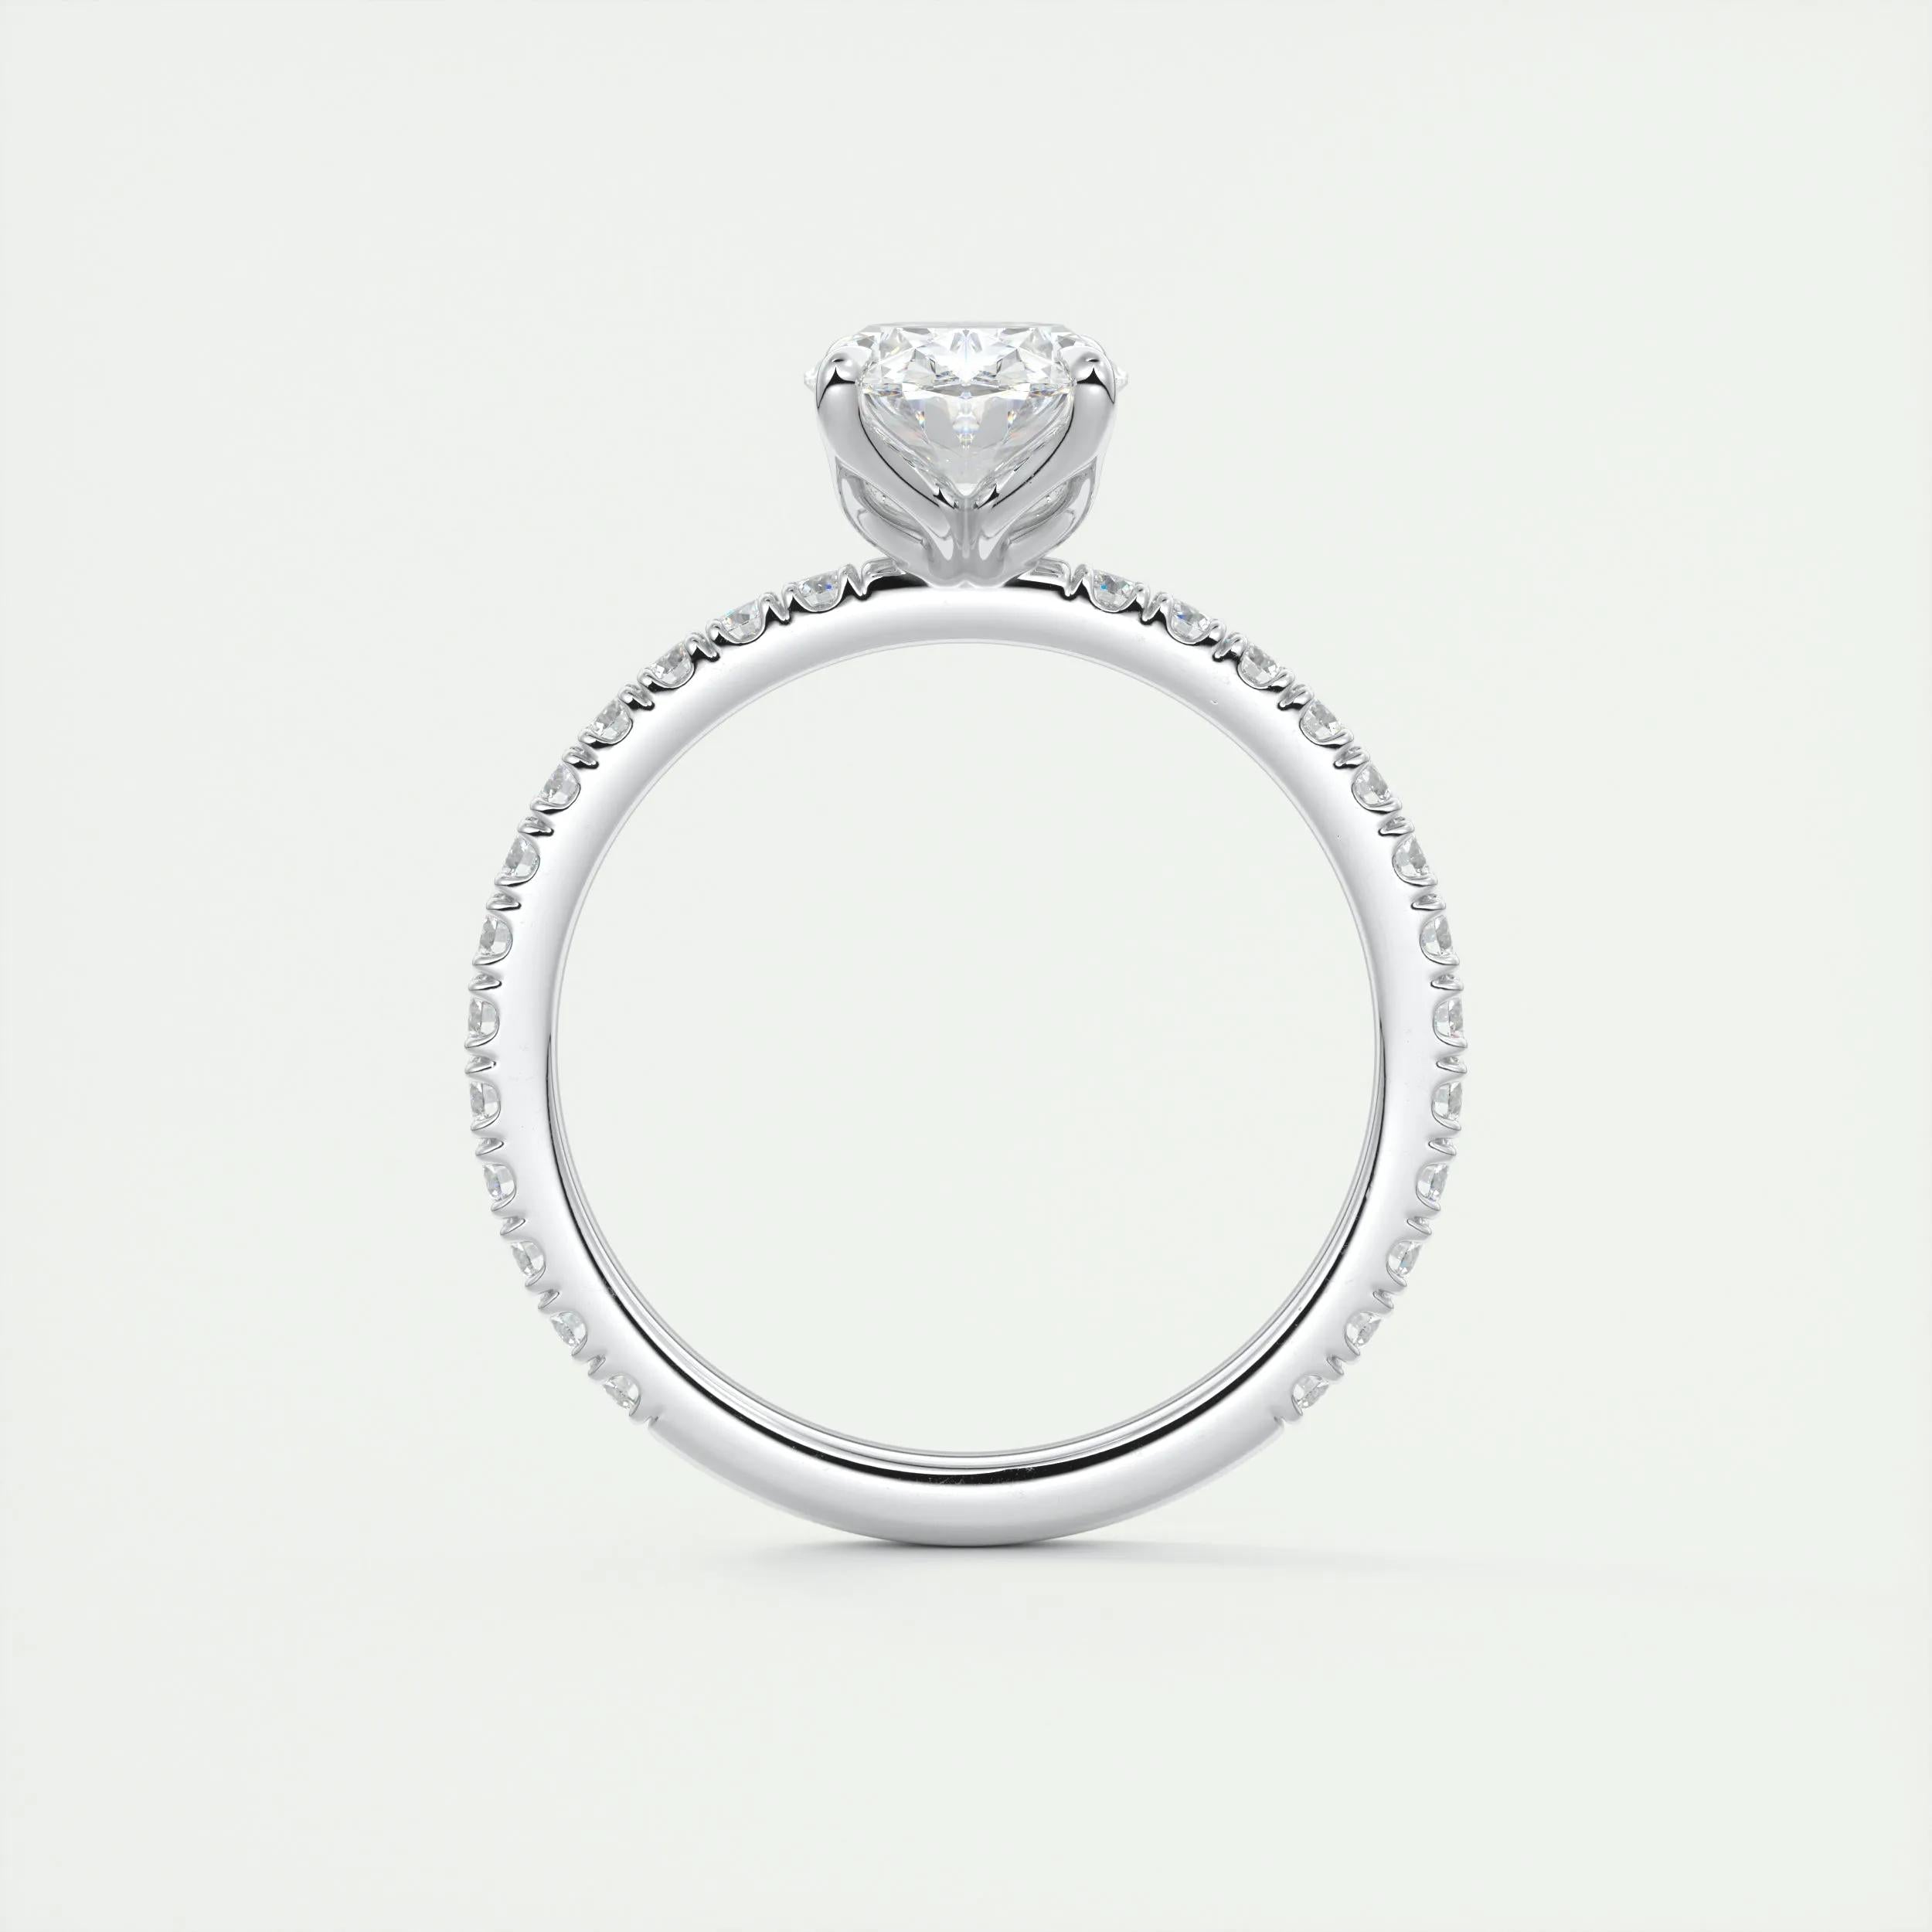 1.5 CT Oval Solitaire CVD F/VS1 Diamond Engagement Ring 7